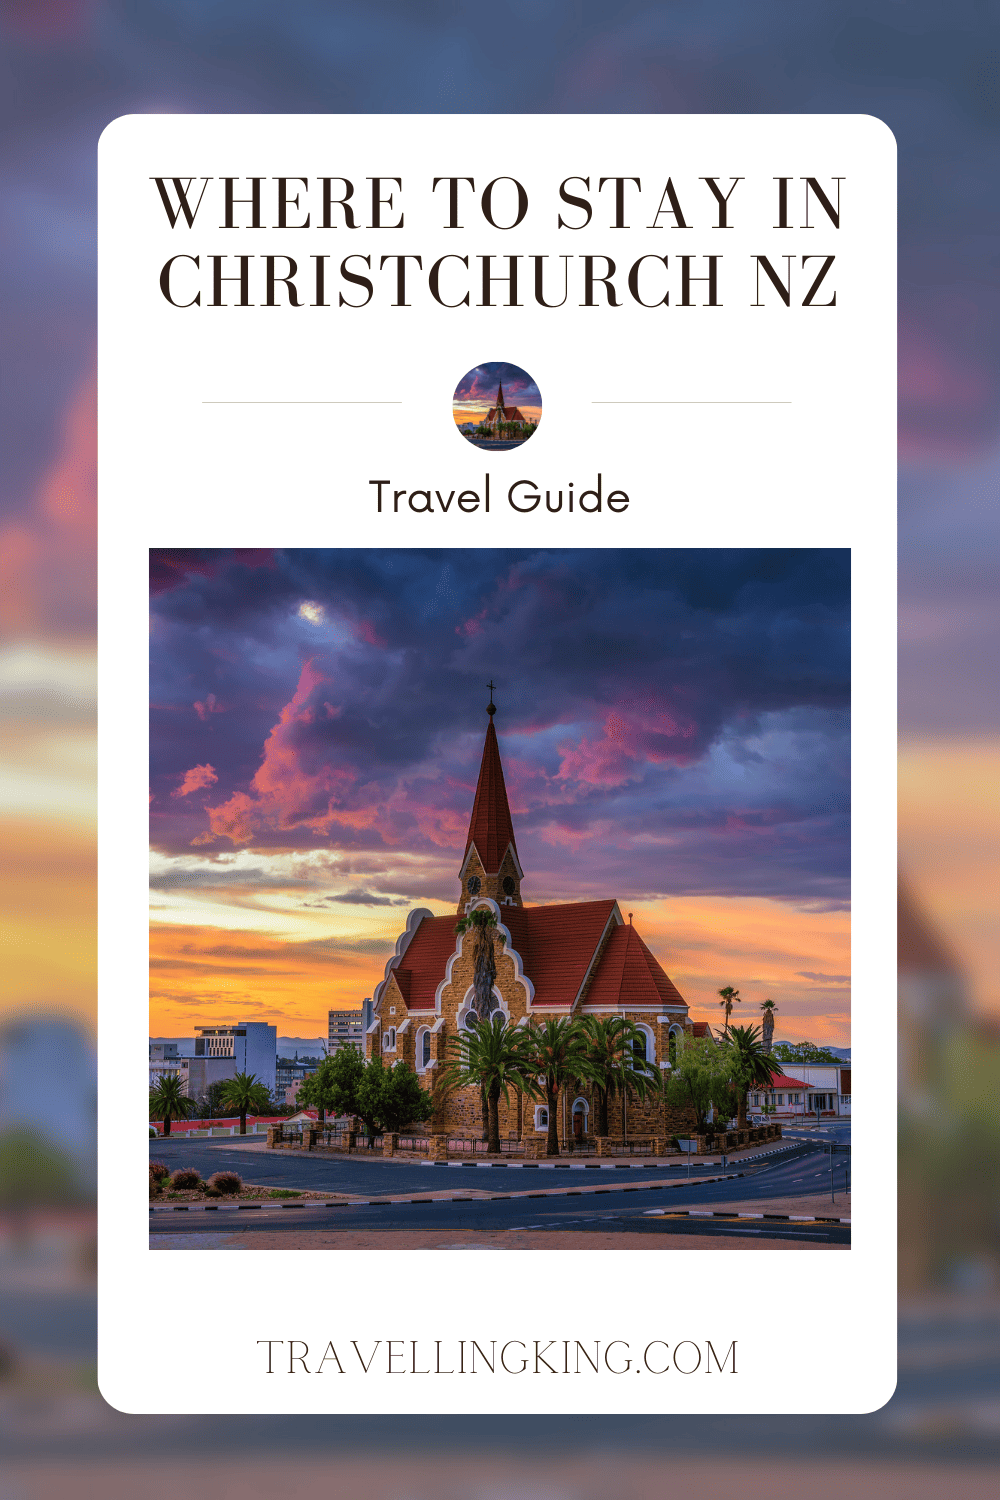 Where to stay in Christchurch